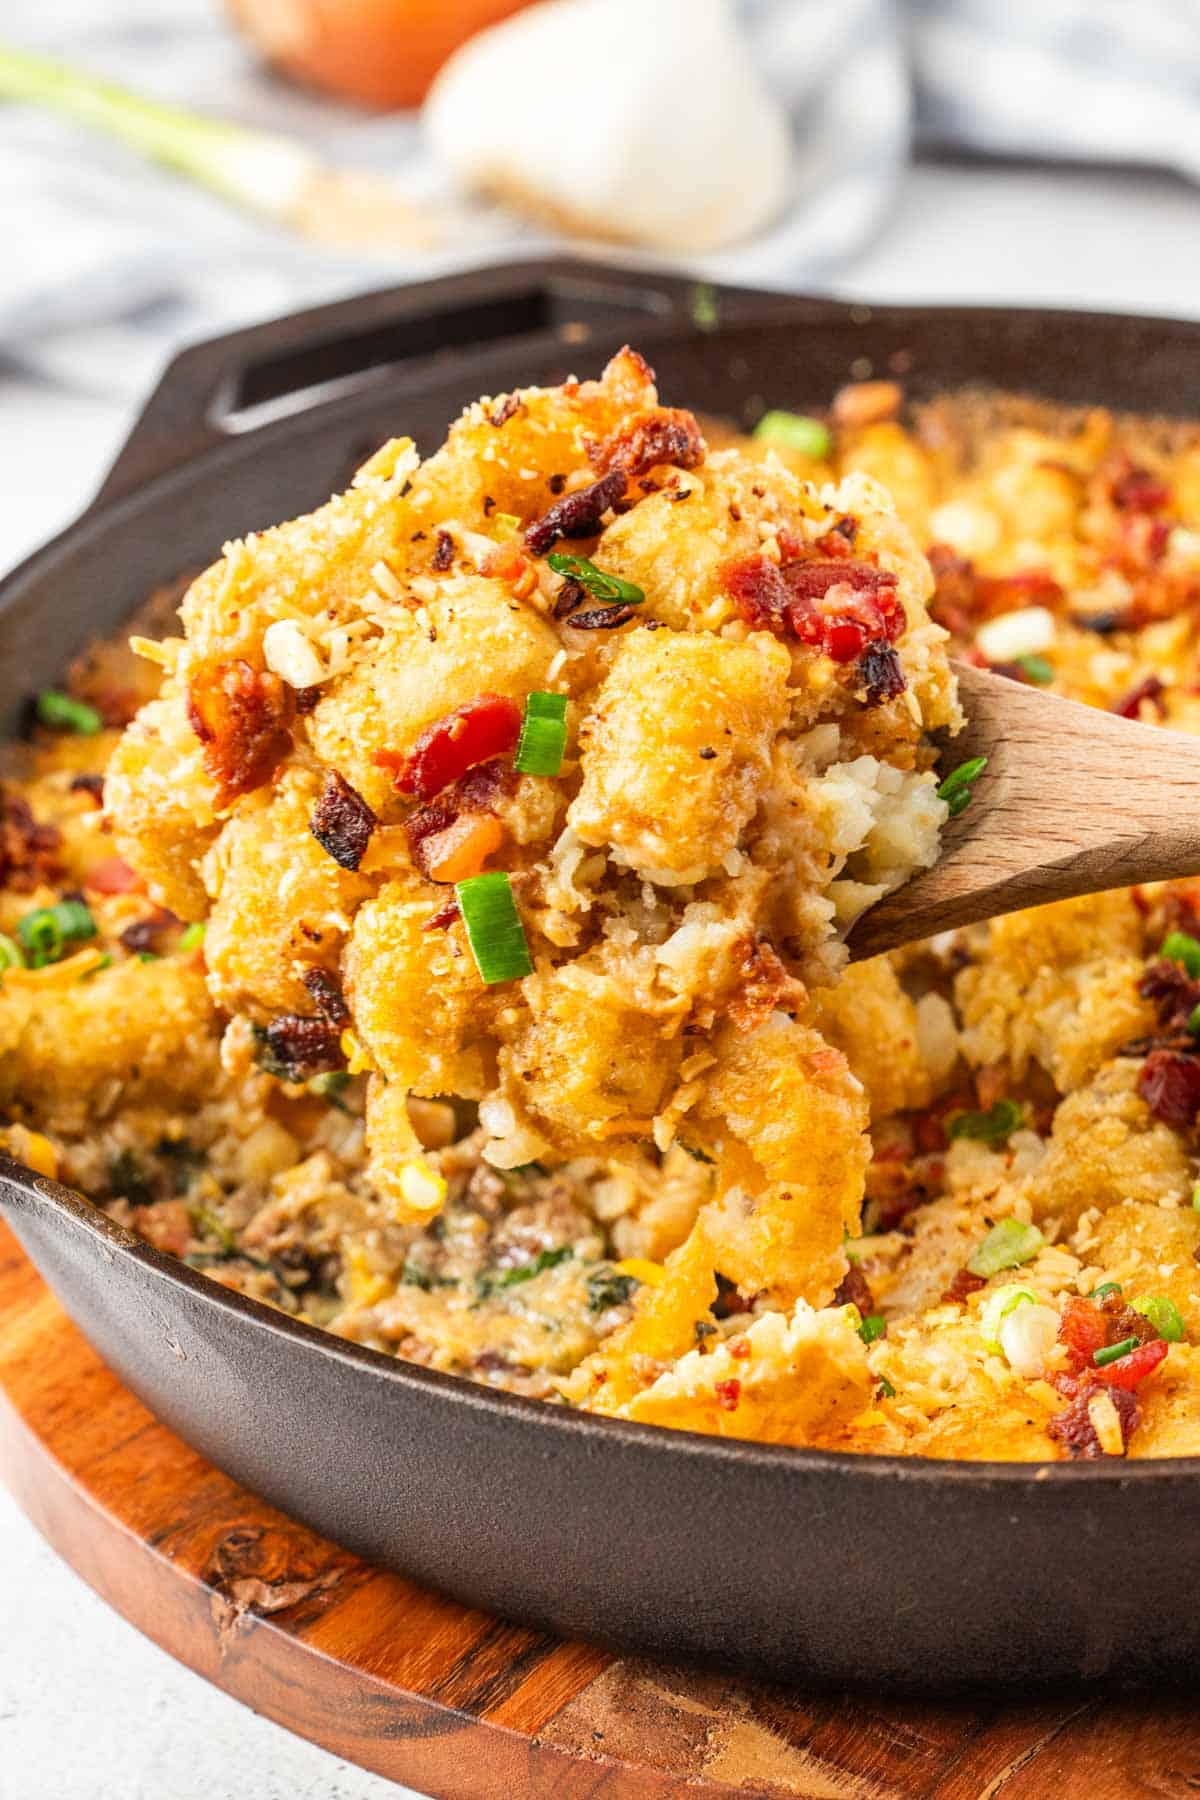 Removing a scoop of cowboy tater tot casserole from the skillet with a wooden spoon.